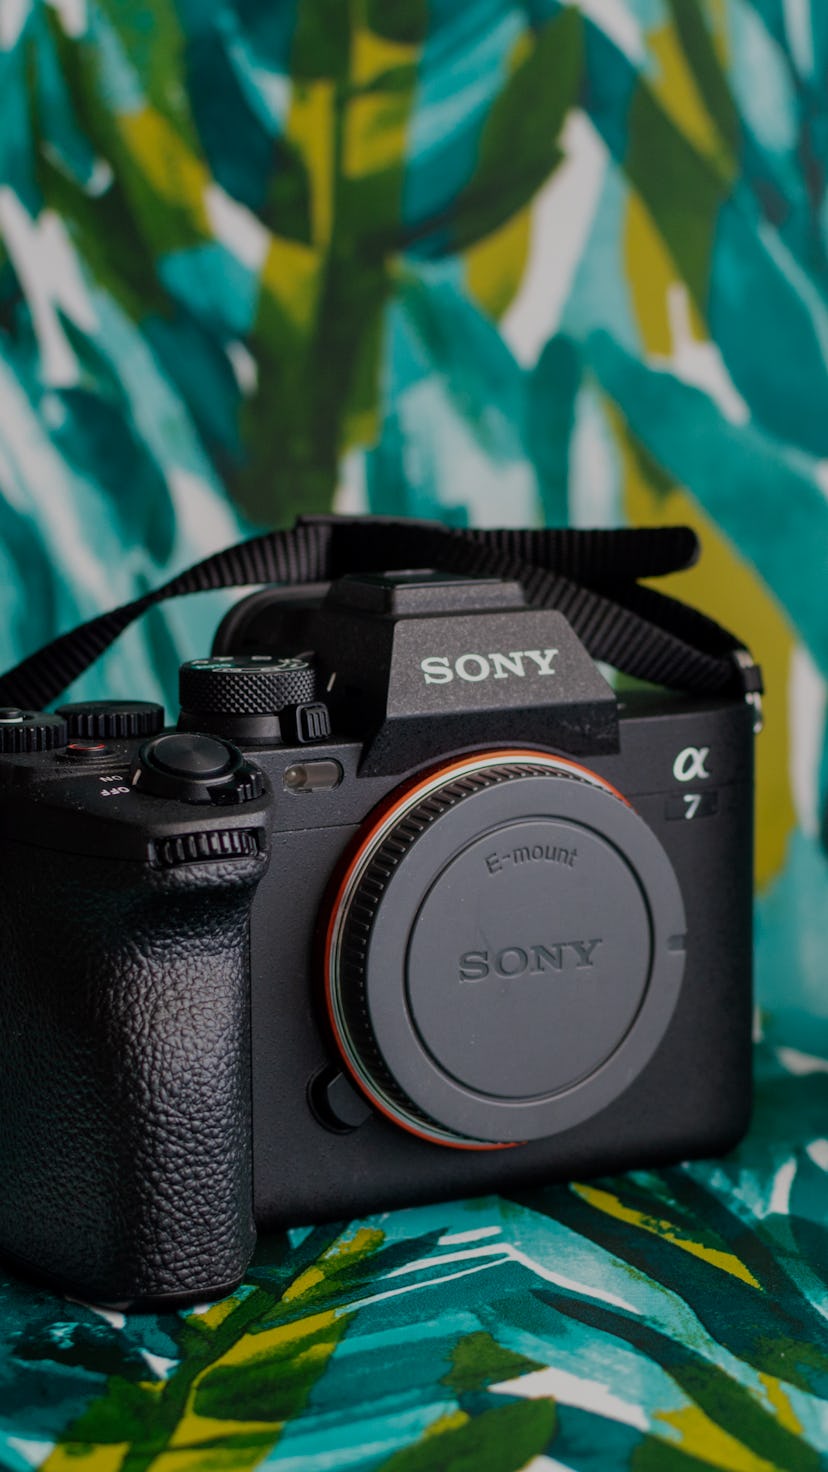 Sony A7 IV review: As a Nikon user, this full-frame mirrorless camera won me over